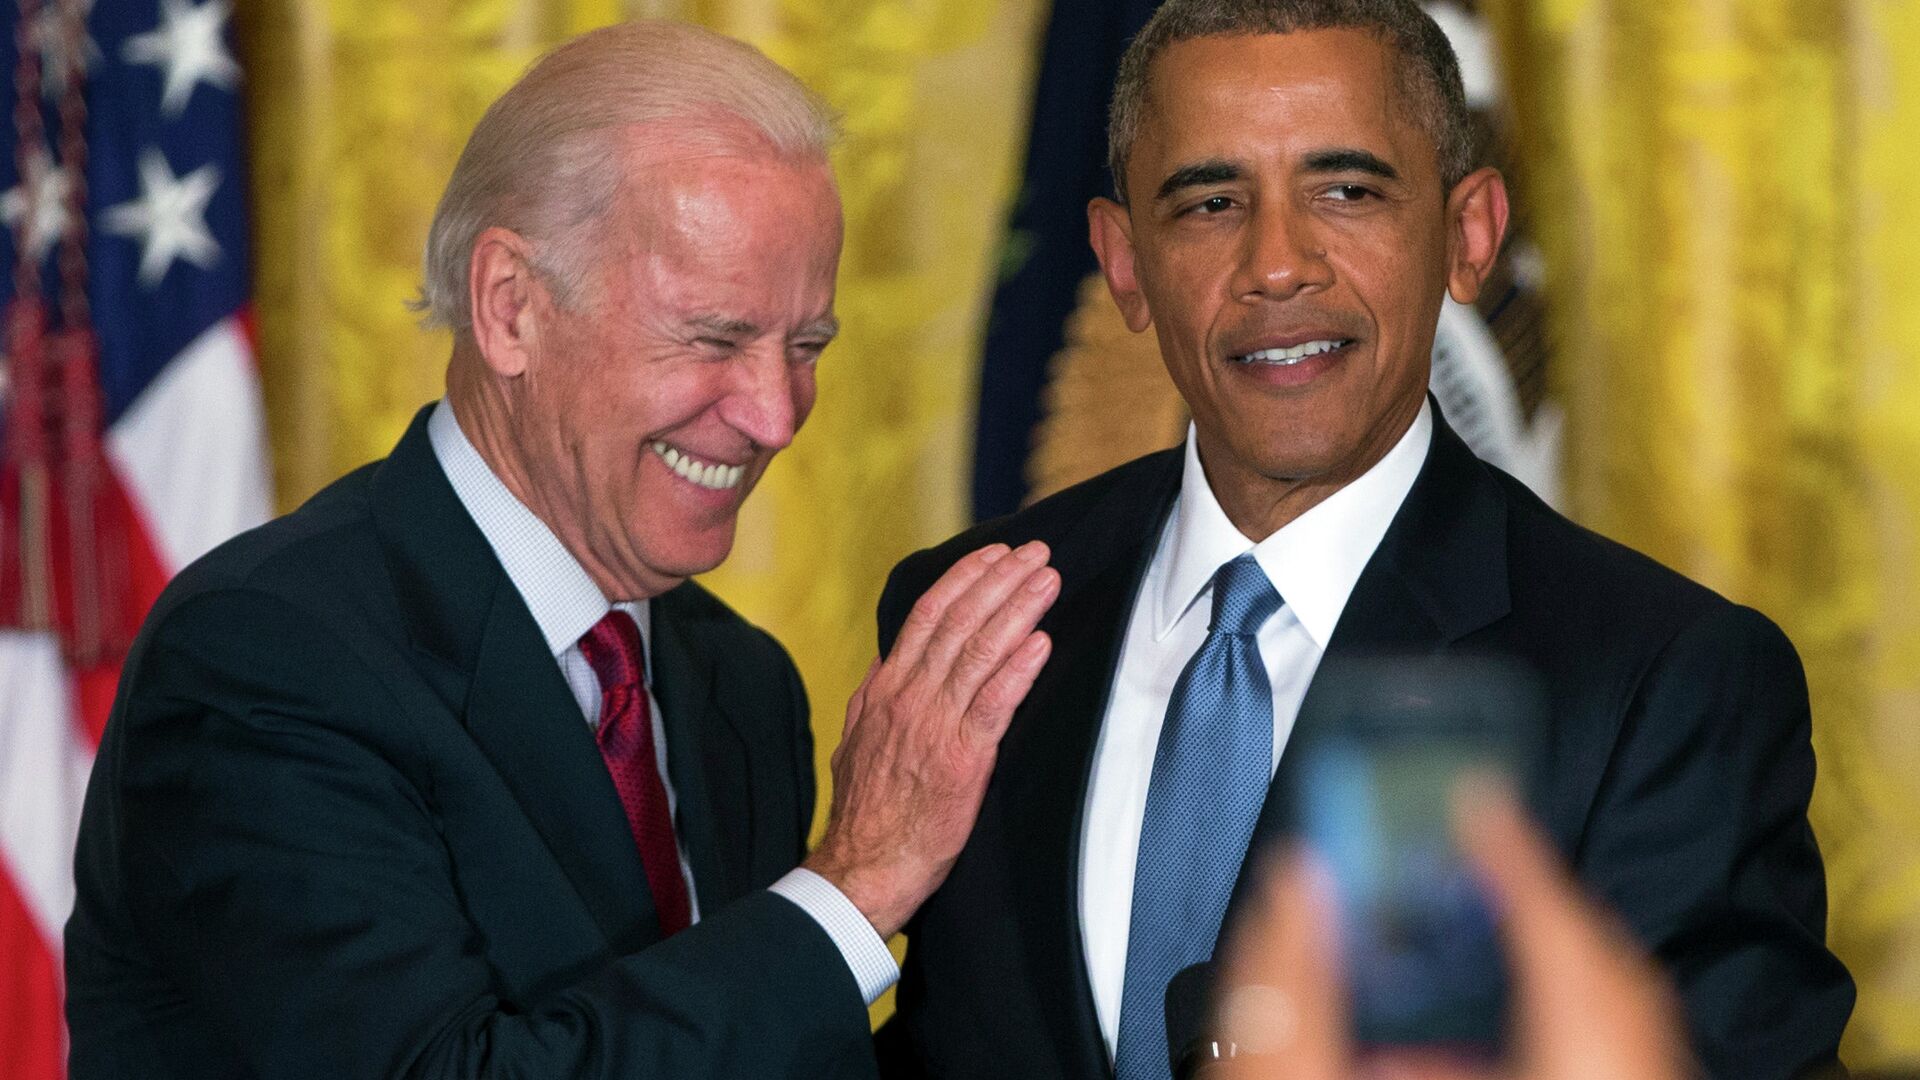 Vice President Joe Biden and President Barack Obama react after a heckler is removed from the East Room of the White House. - Sputnik International, 1920, 19.04.2022